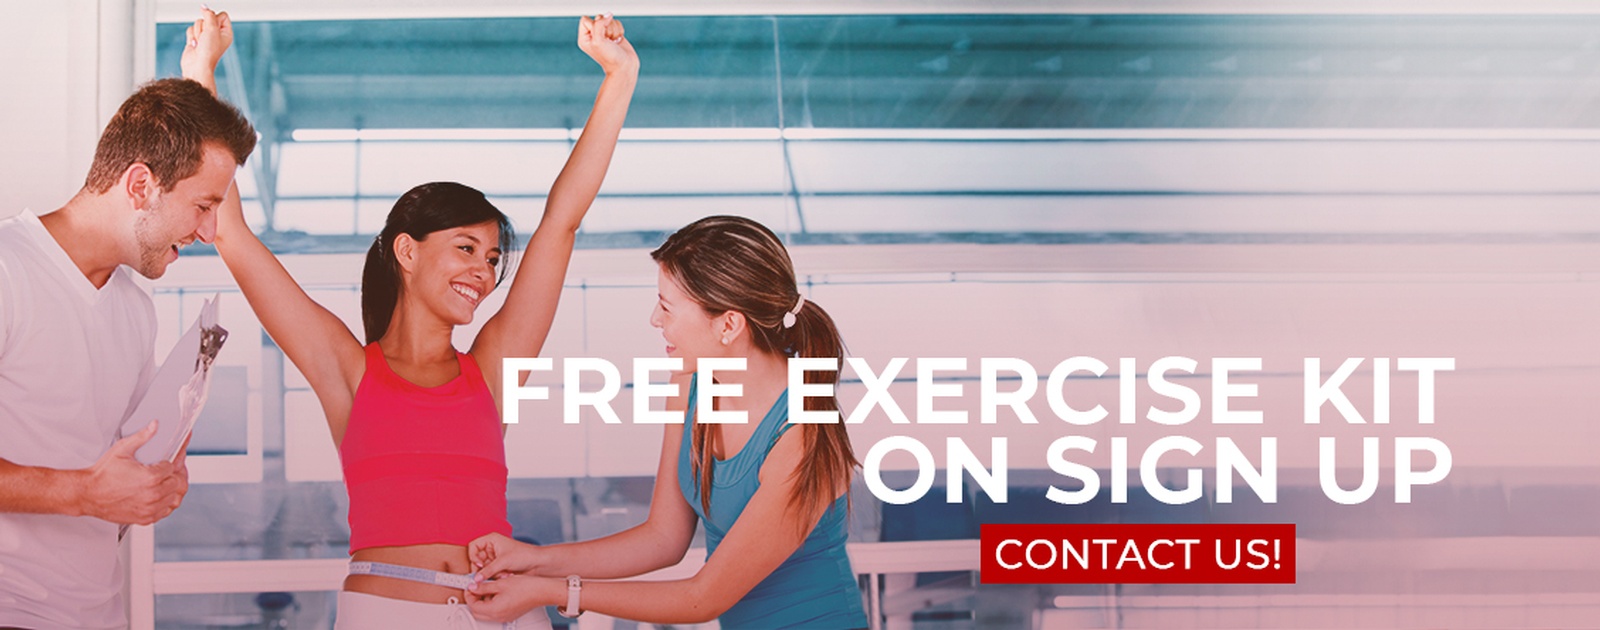 Free Exercise Kit On Sign Up